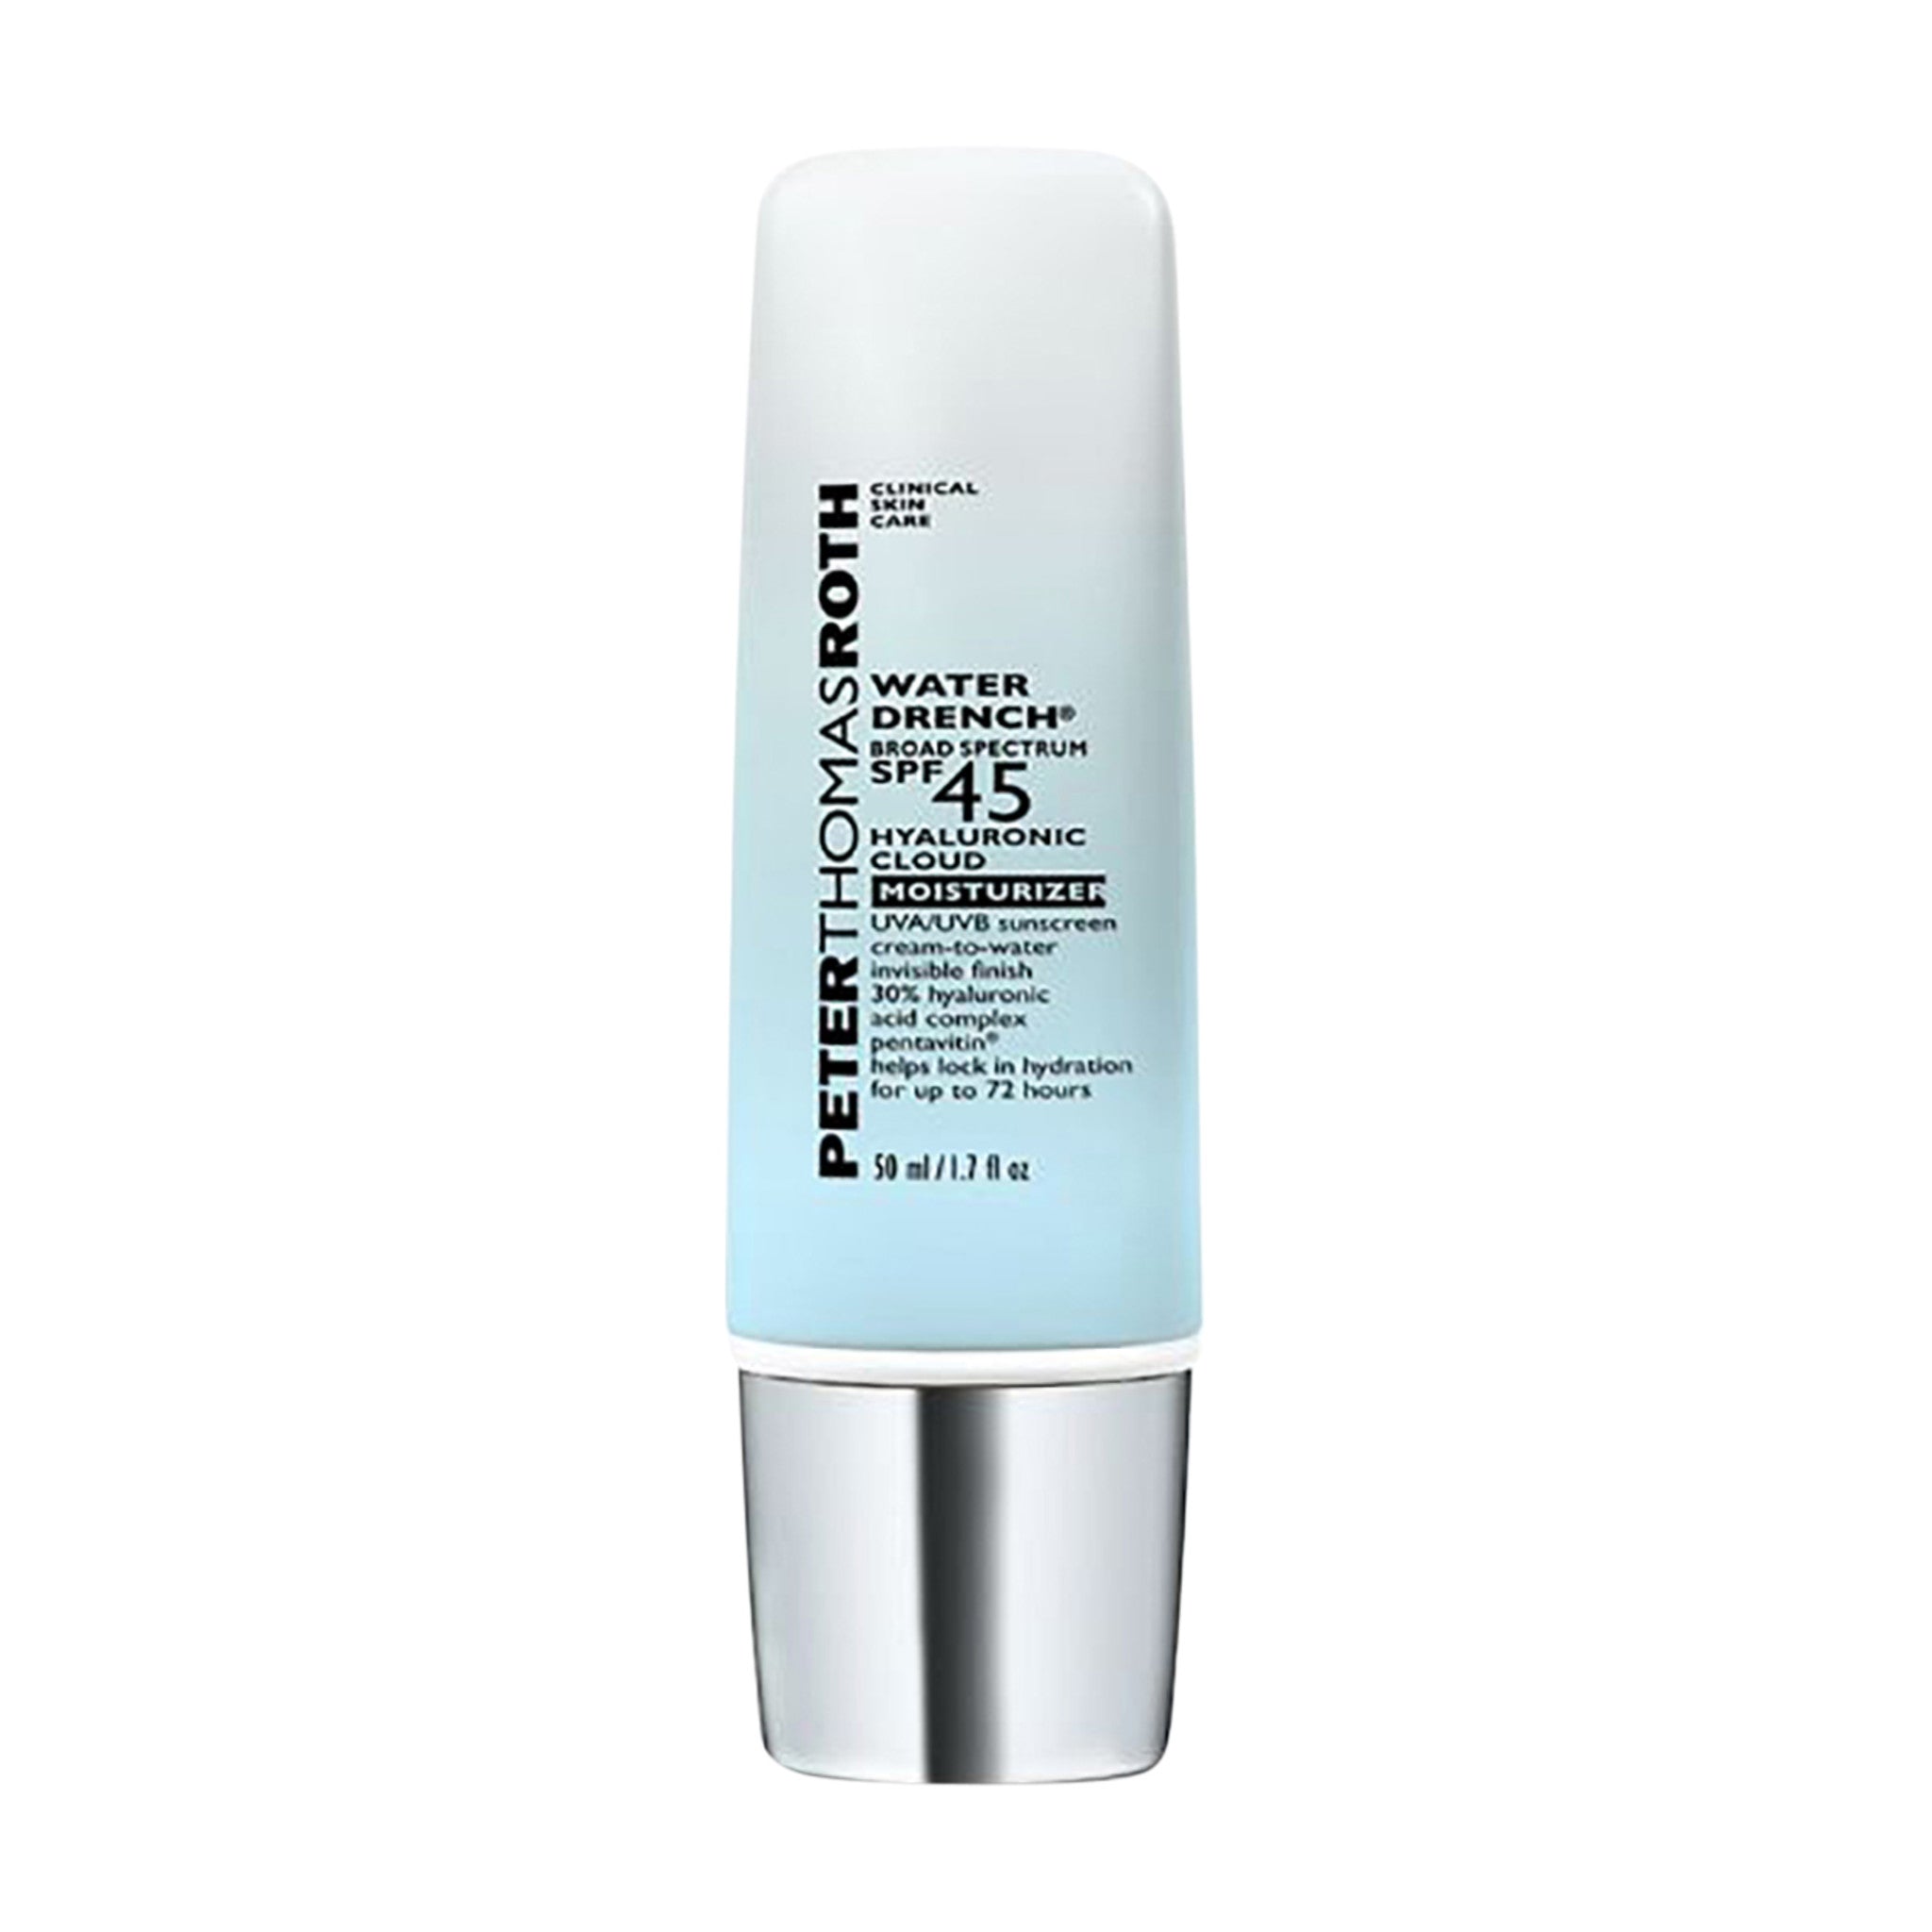 Water Drench Broad Spectrum Hyaluronic Cloud Moisturizer SPF 45 main image.